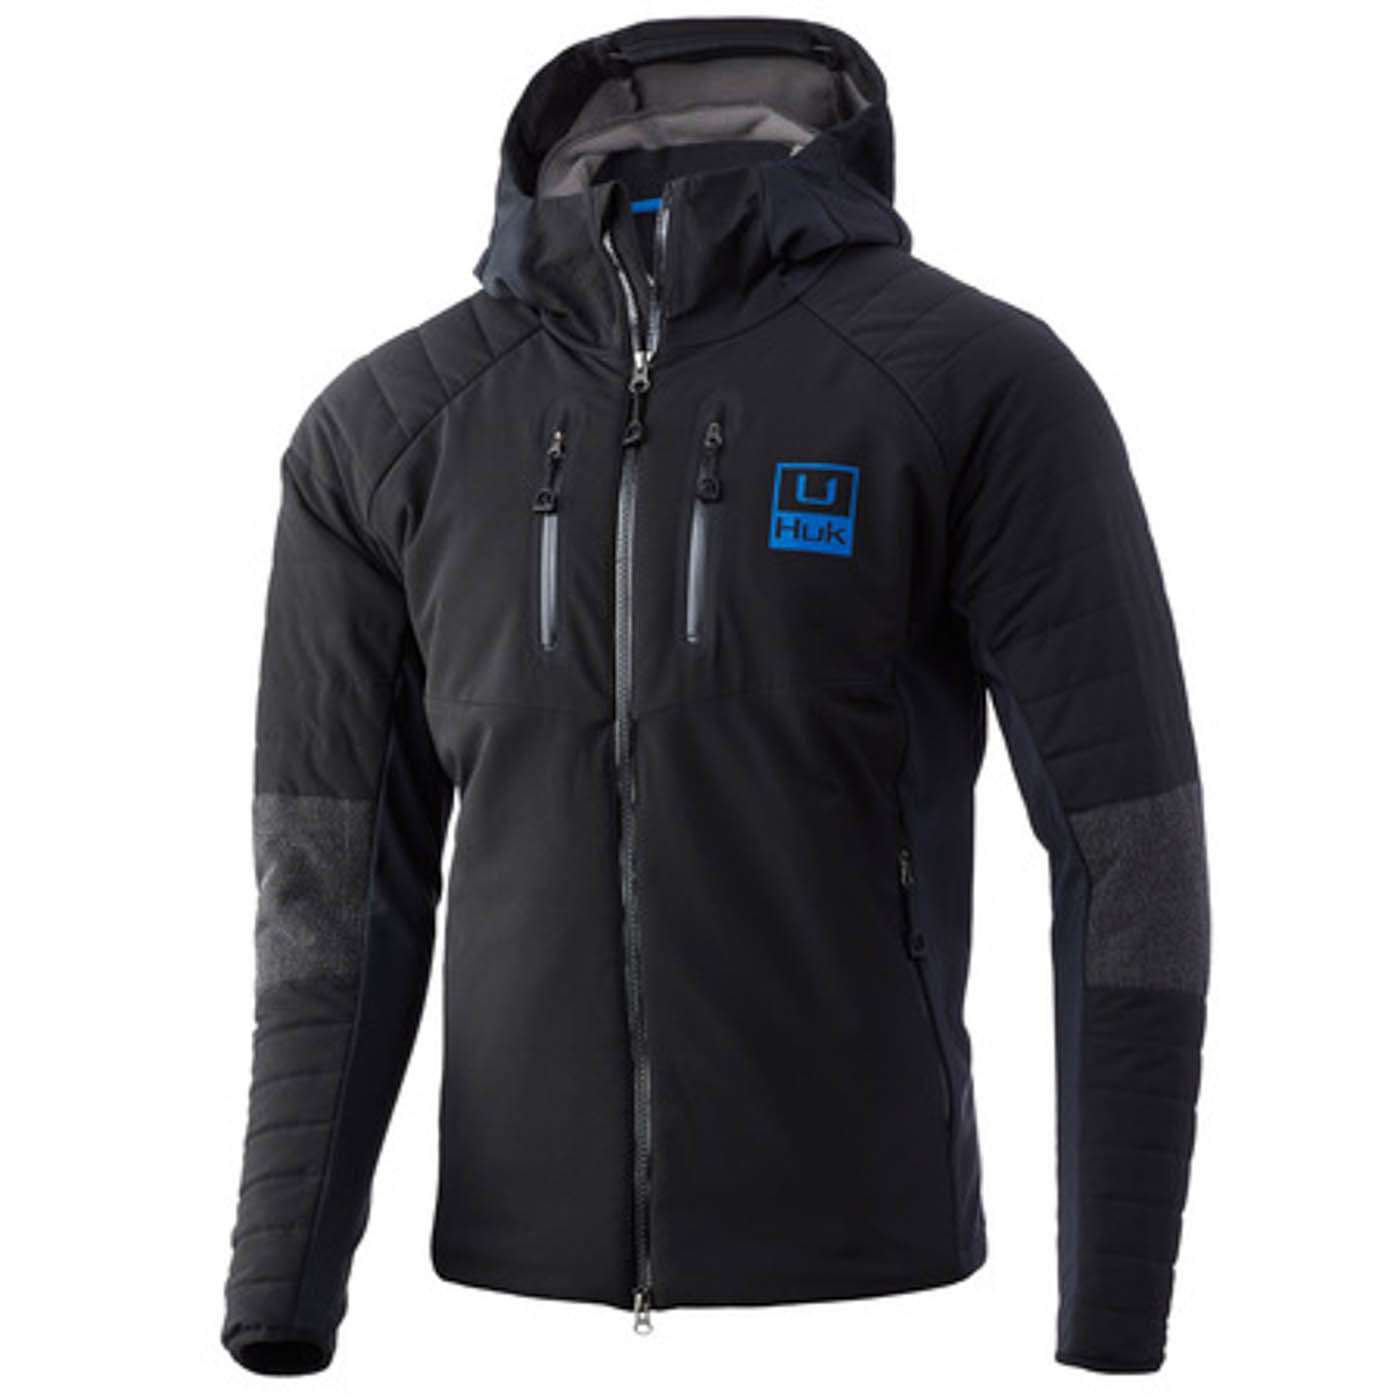 <p><strong>Huk Icon X Superior Hybrid Jacket</strong></p><p>With durable, 100% polyester construction, the jacket is 100% windproof and 100% waterproof. The DWR finish repels water, and the jacket features abrasion-resistant wear areas, a two-piece hood, internal cuff gussets, body-mapped insulation, and magnetic pocket flaps. $290 ($300 for 3XL). <a href=